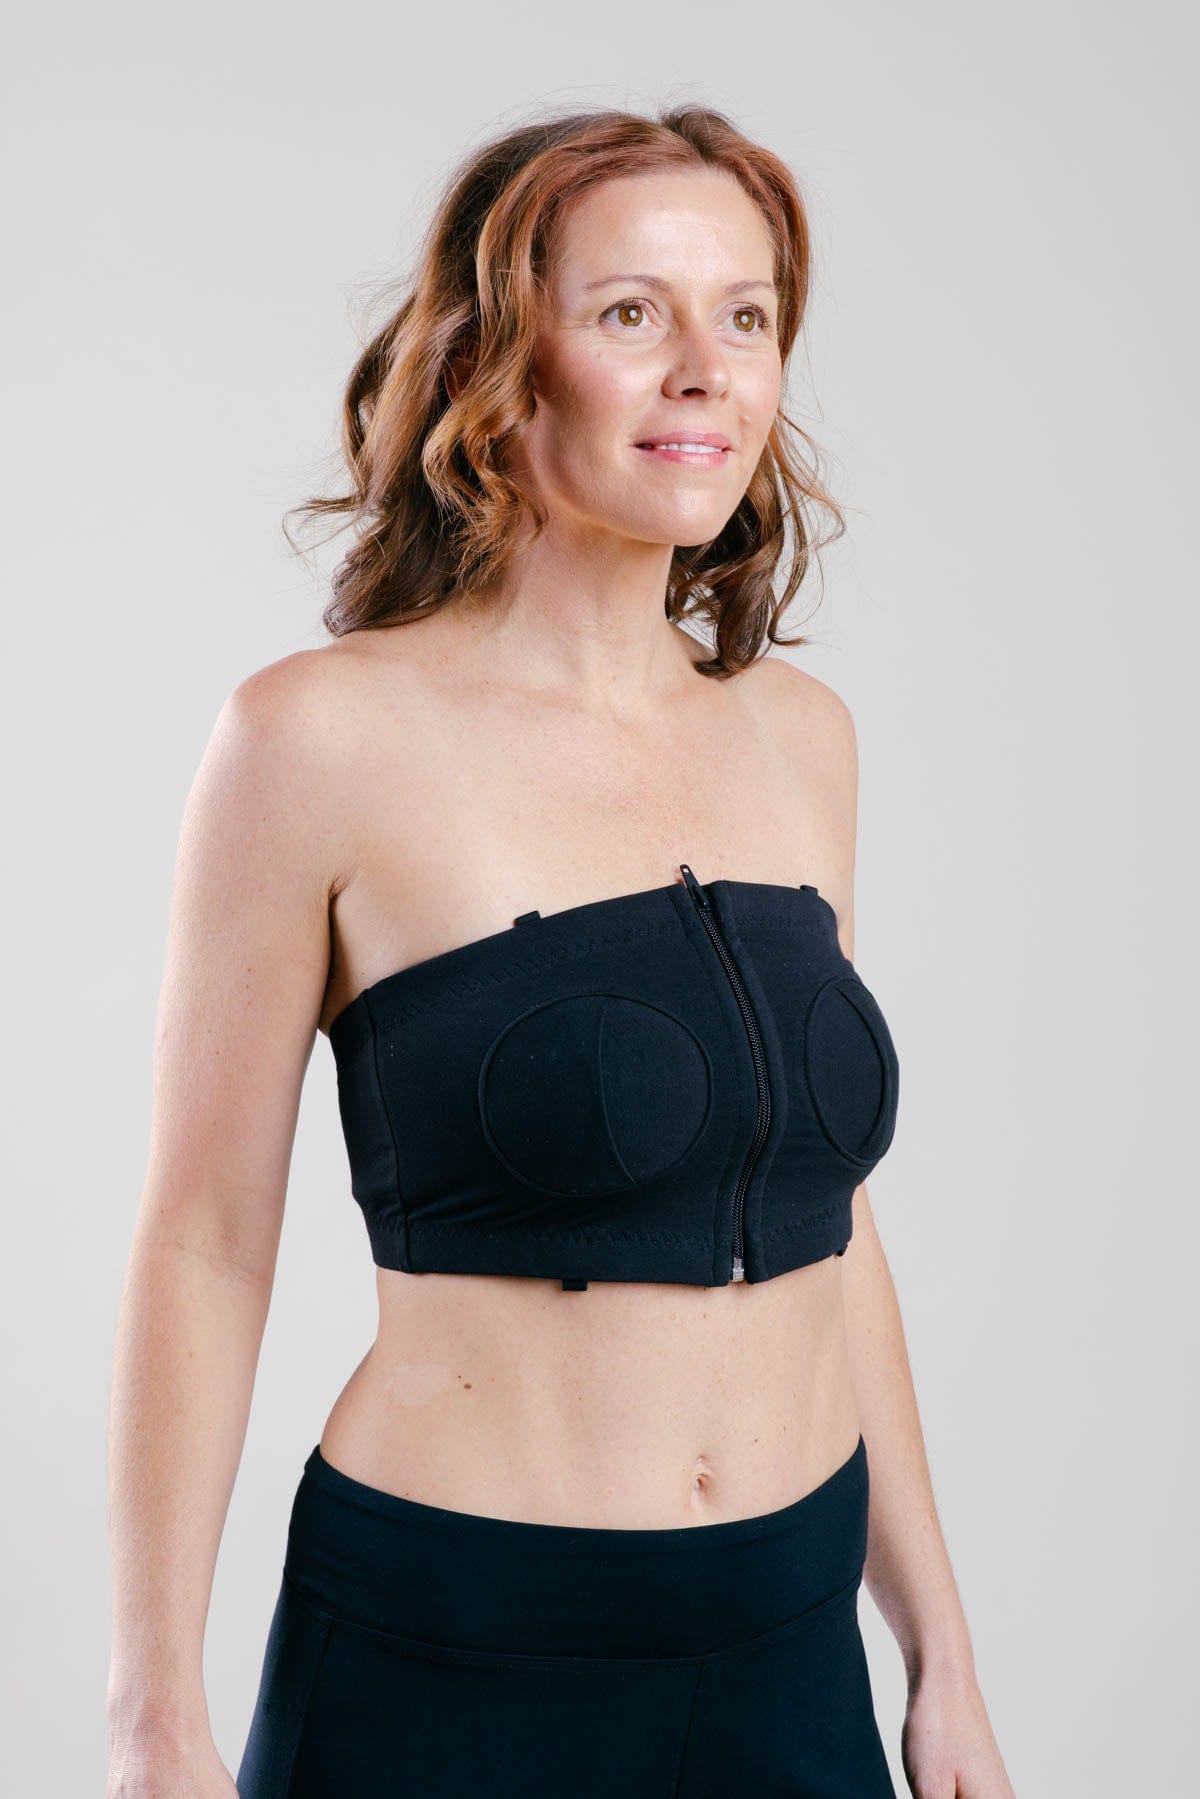 Adjustable Hands Free Pumping Bra Simple Wishes